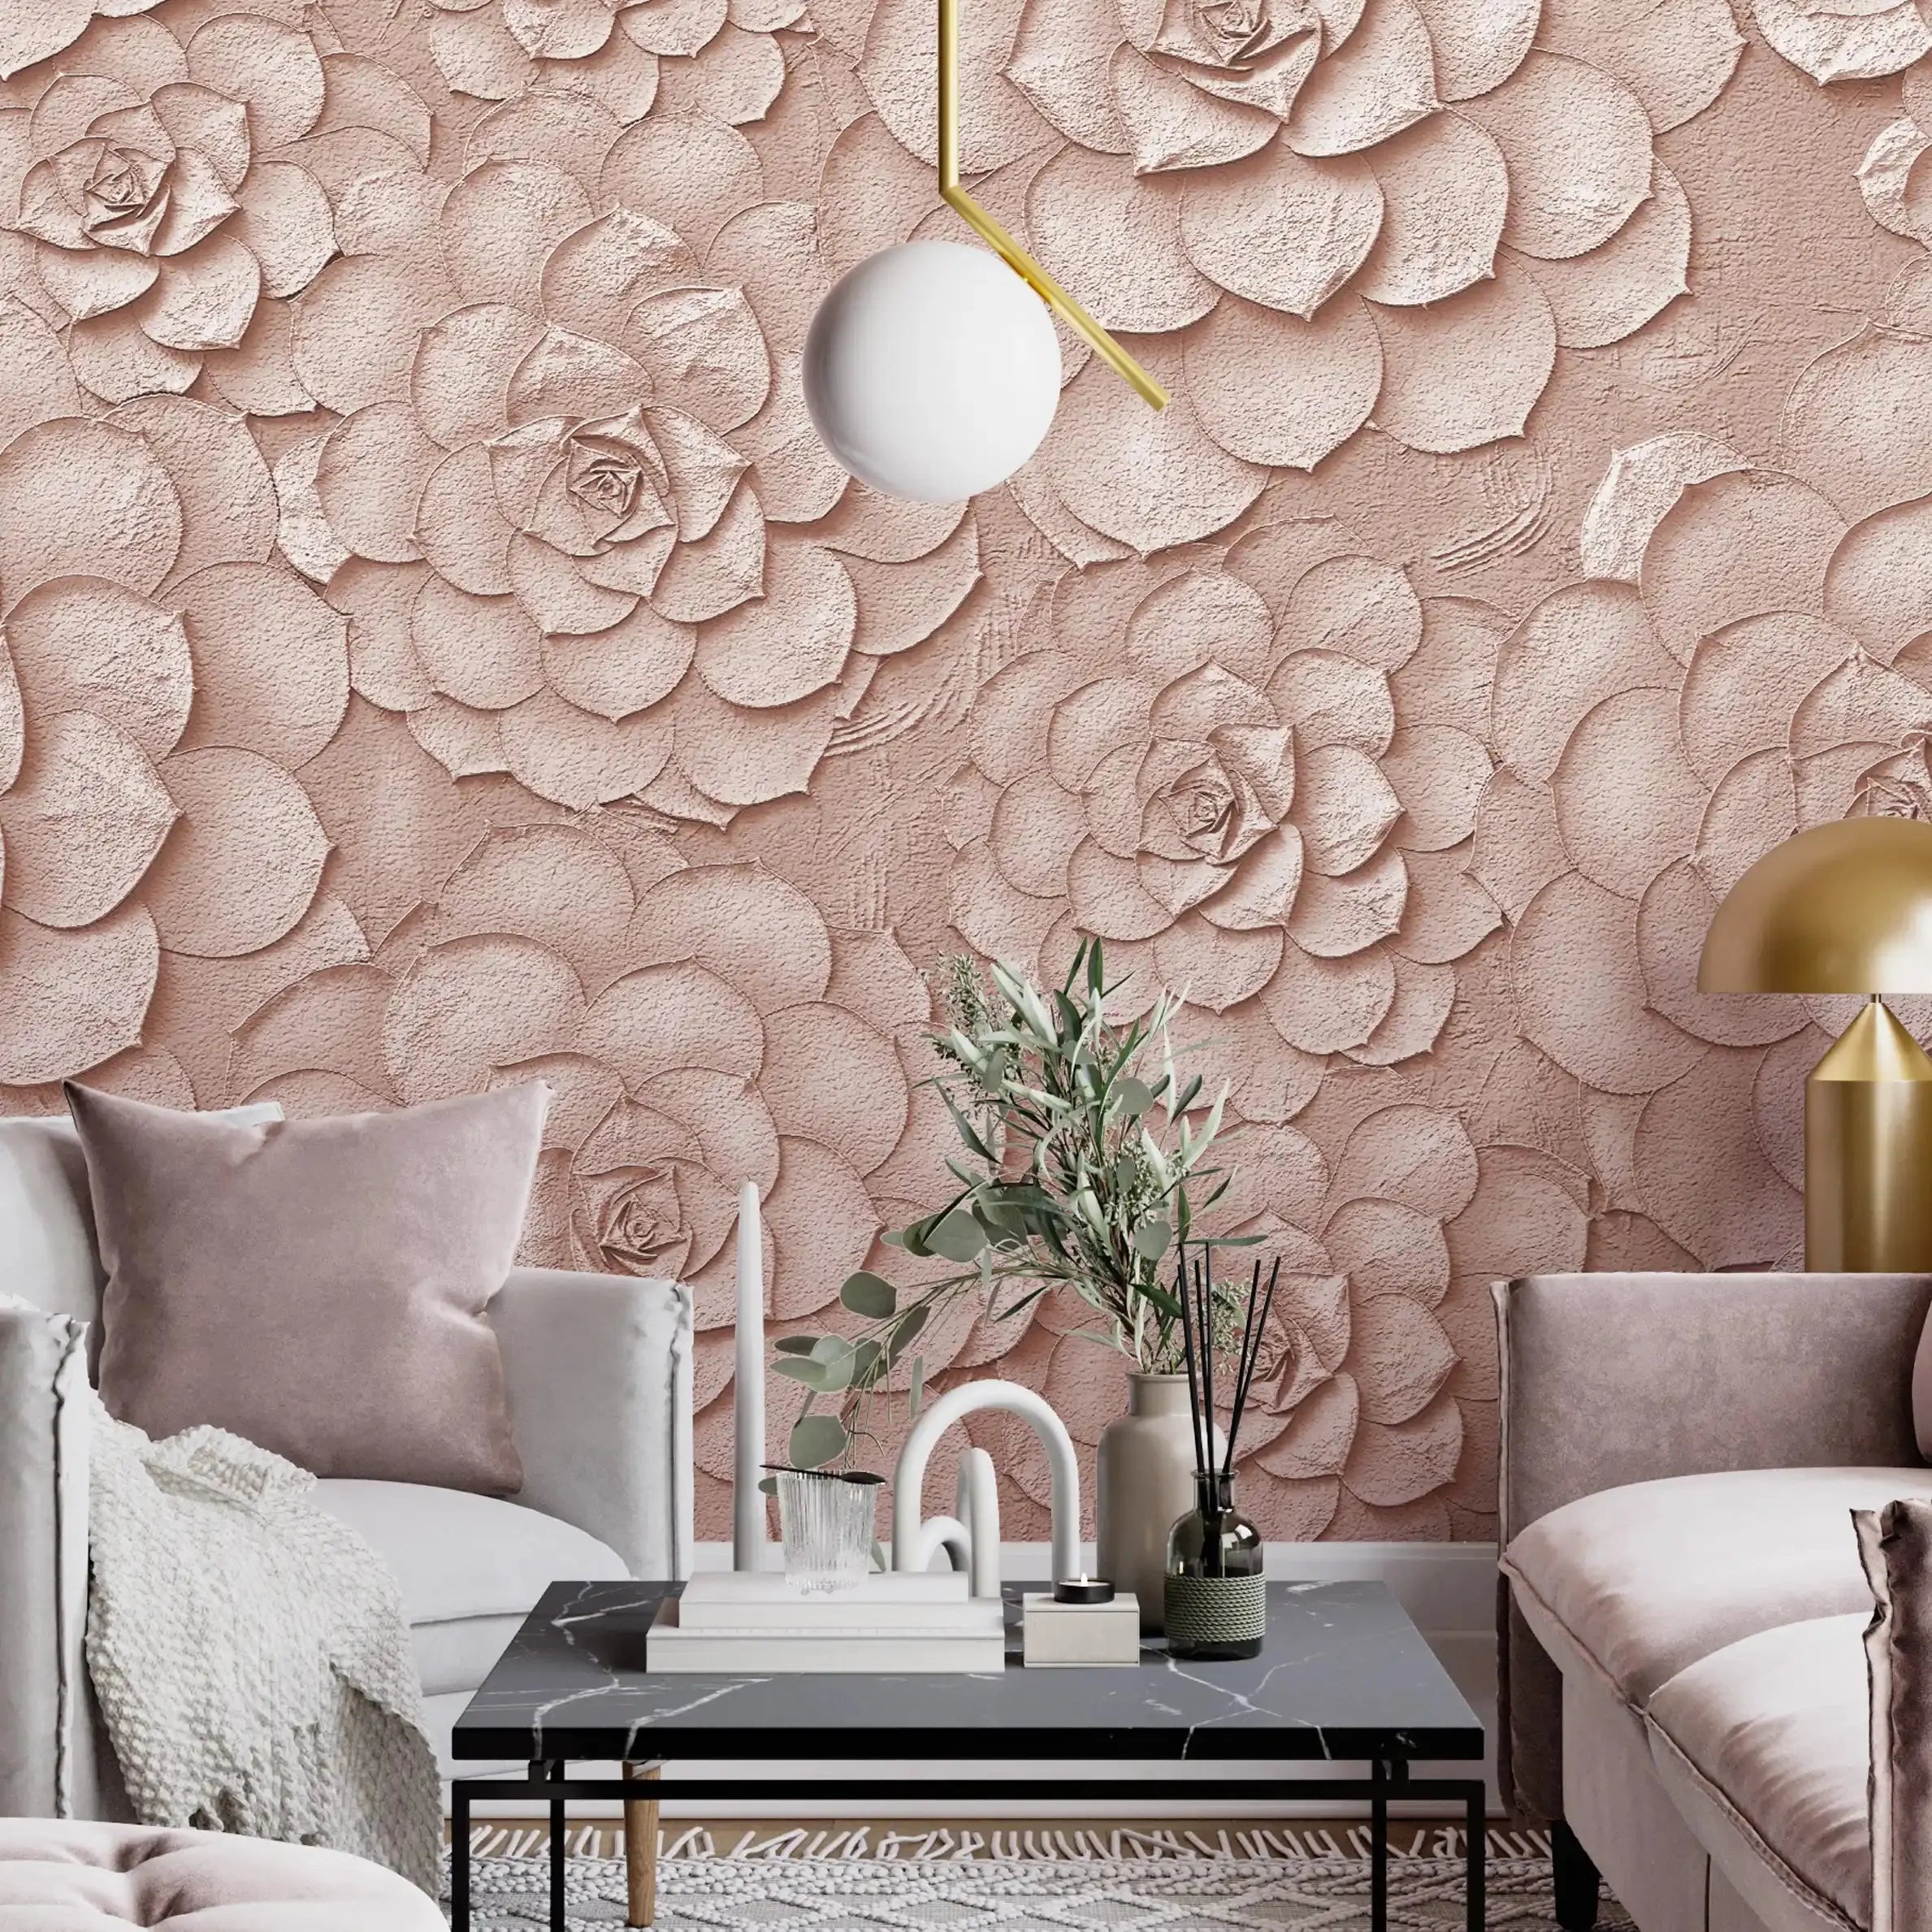 3012-D / Peel and Stick Wallpaper: Orange Rose and White Floral, Easy Install, Self Adhesive Wall Paper for Any Room - Artevella